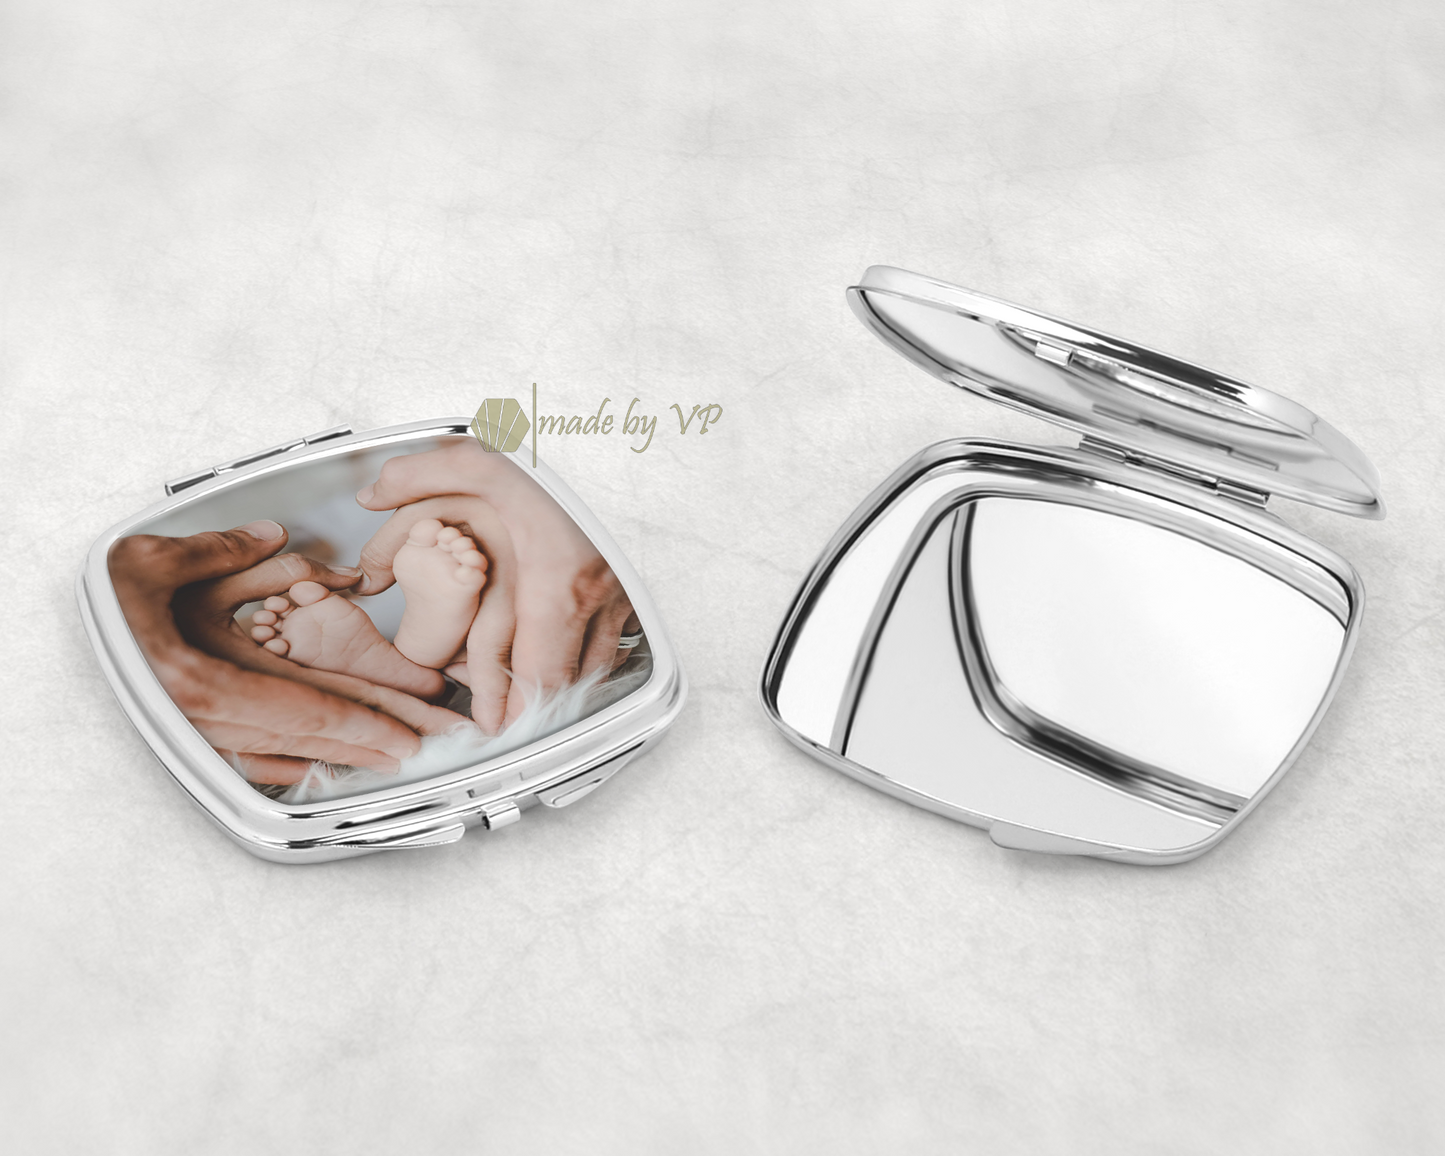 Personalised Photo Compact Mirror With a Box